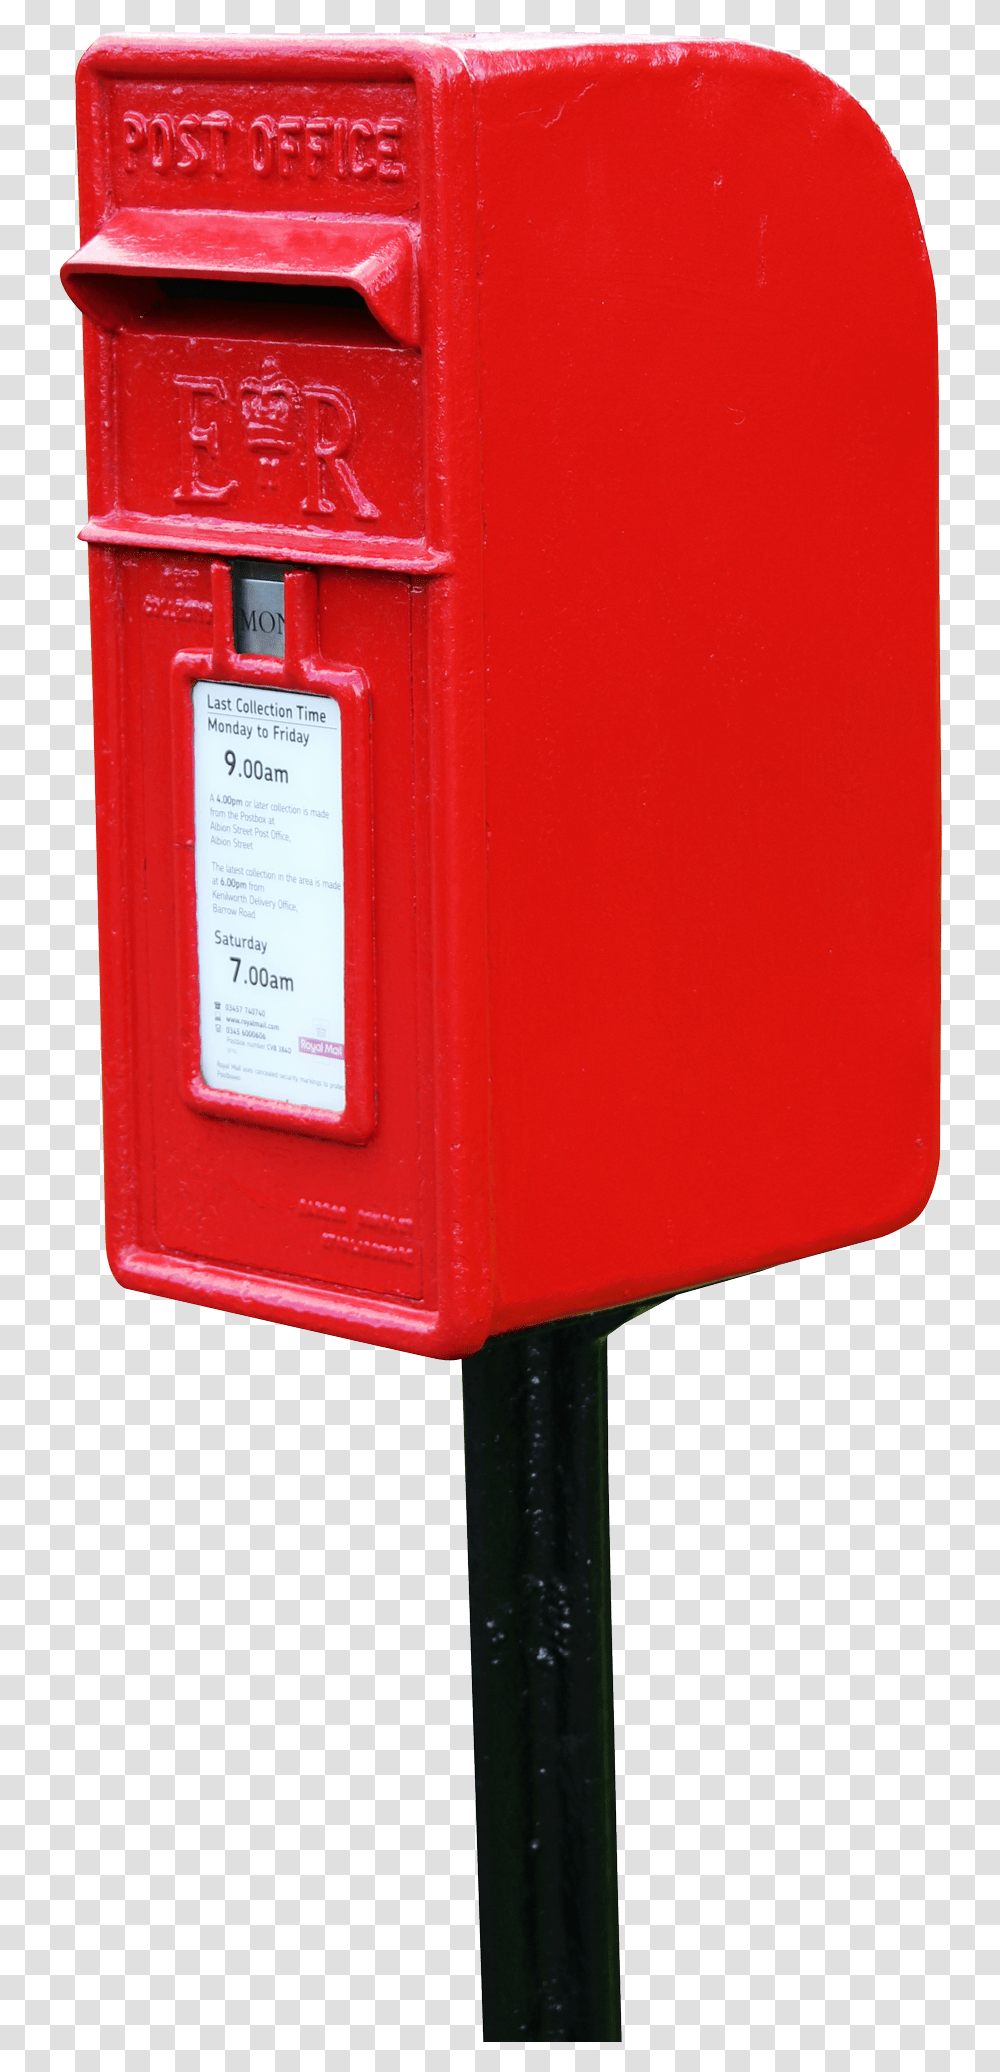 Mailbox Postbox Images Free Download Post Box, Public Mailbox, Letterbox Transparent Png